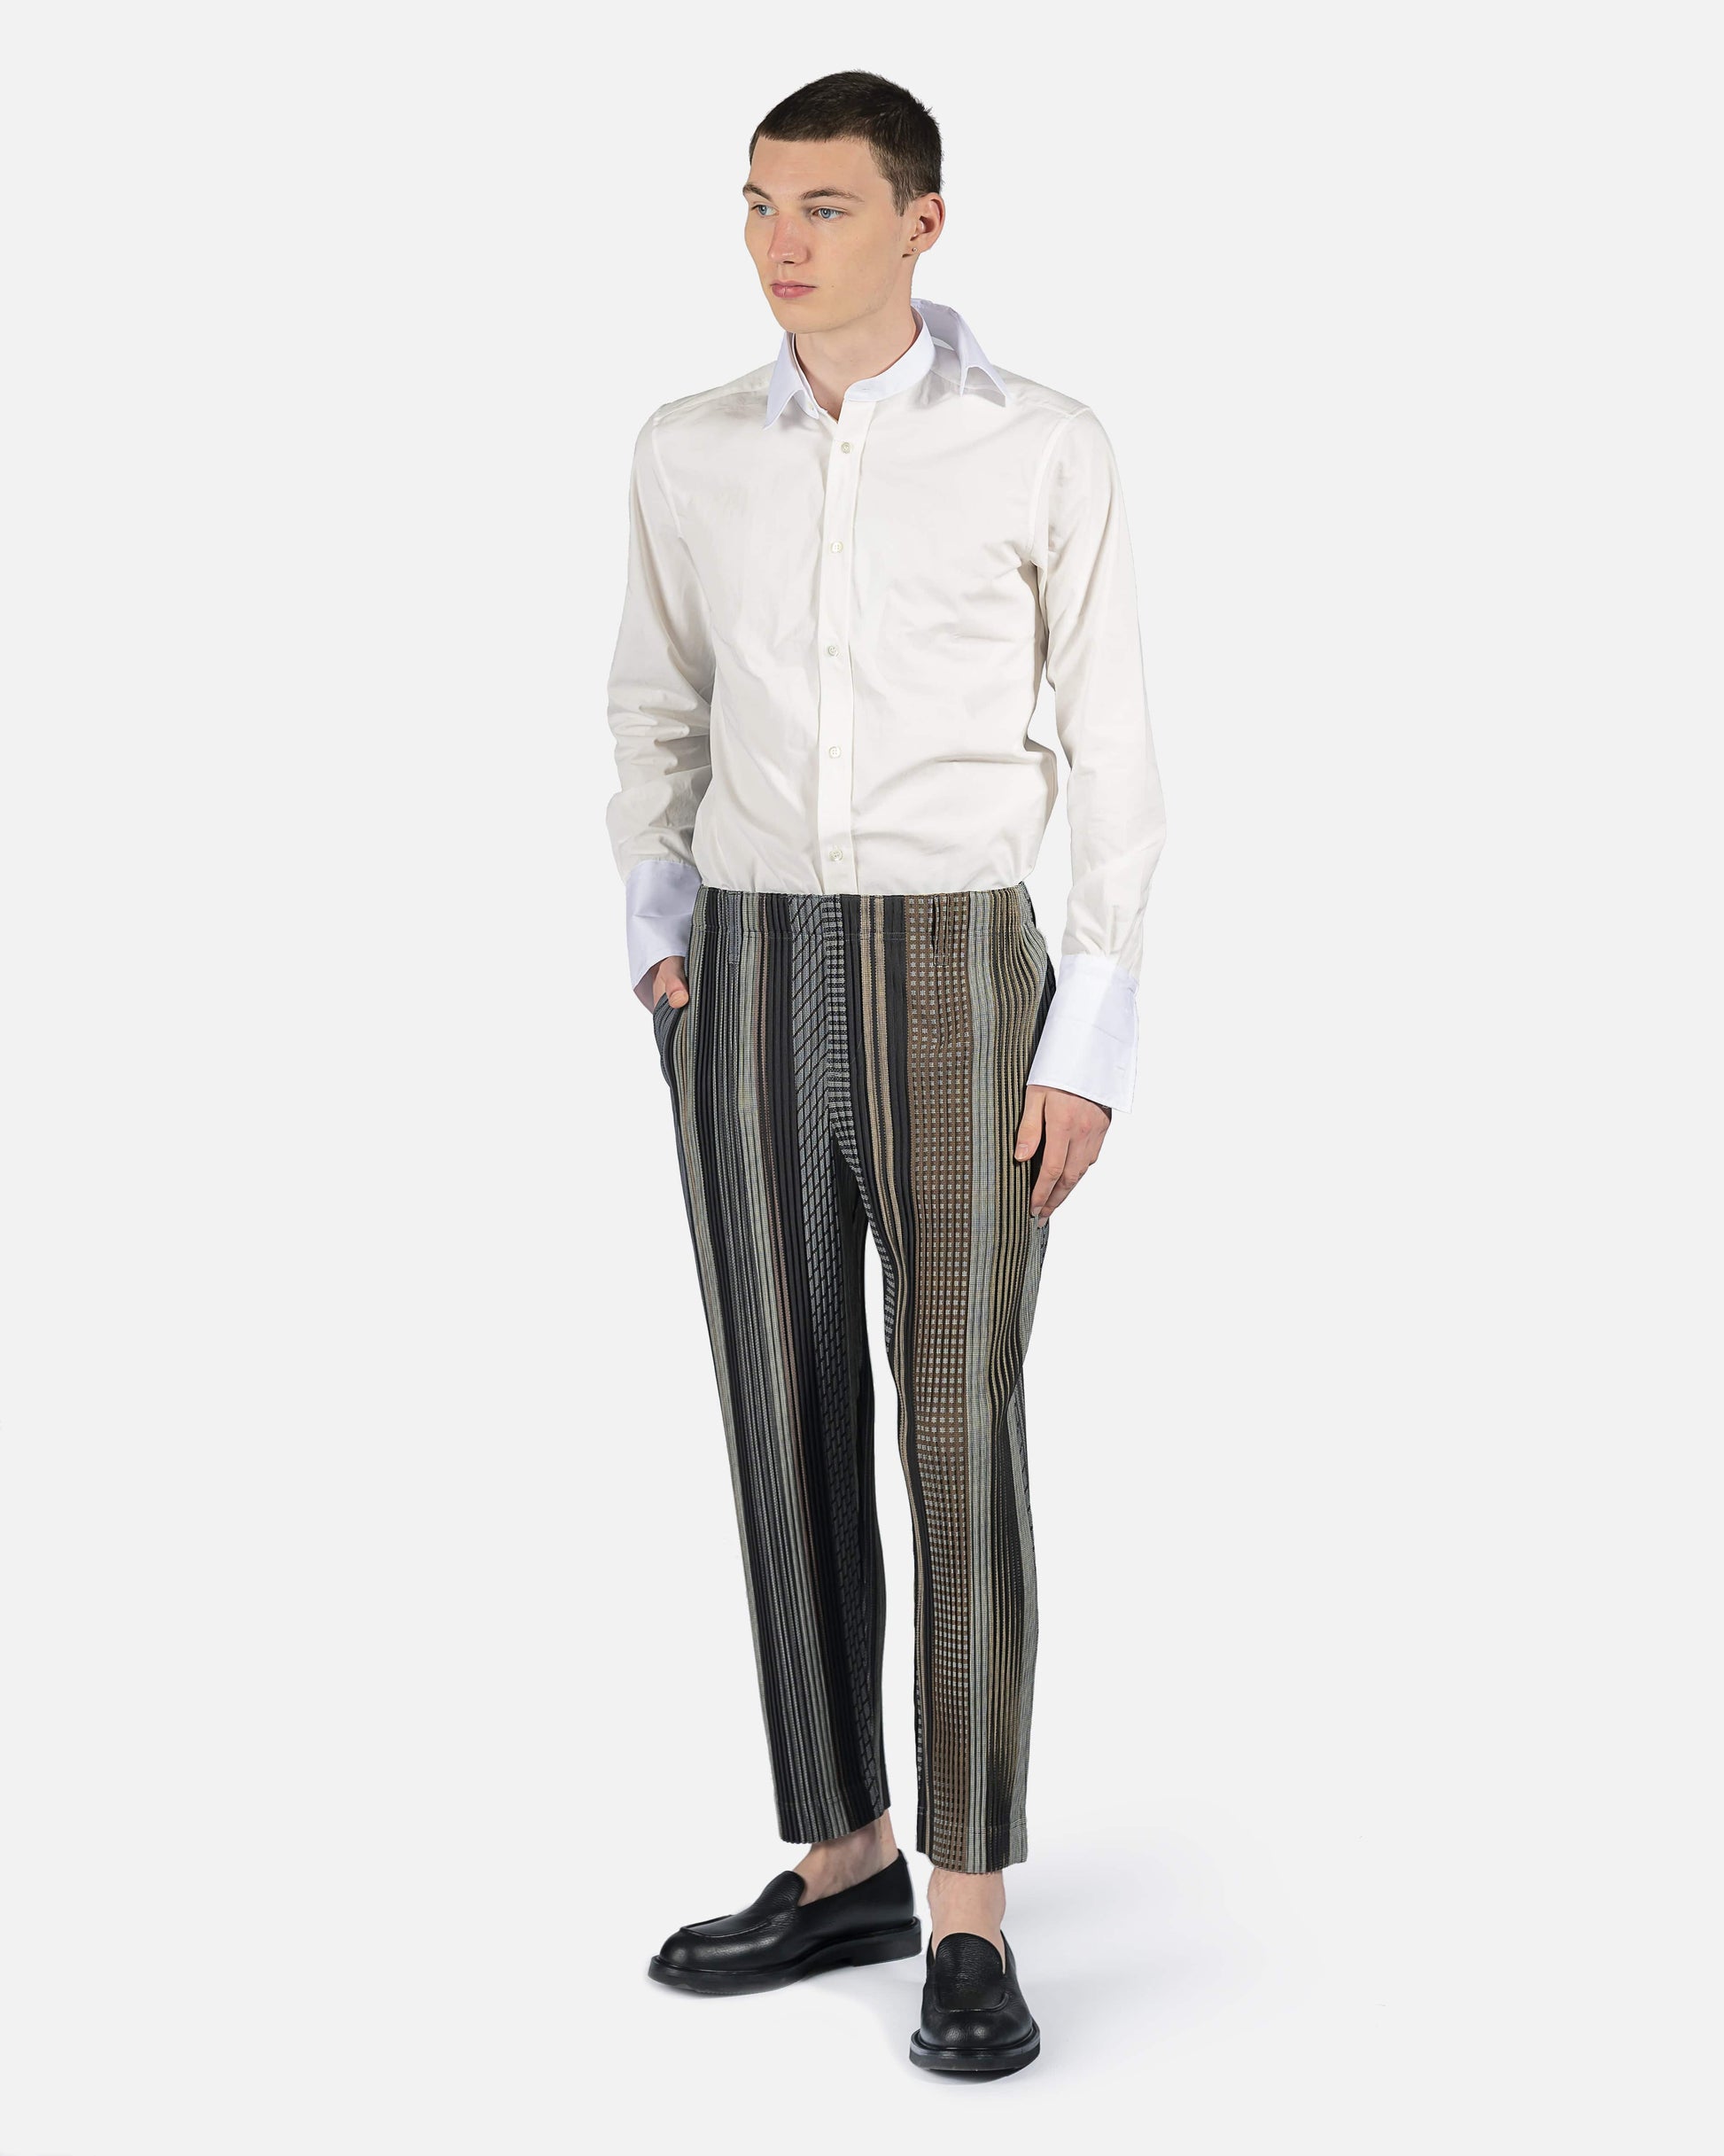 Homme Plissé Issey Miyake Men's Pants Woven Structure Trousers in Brown